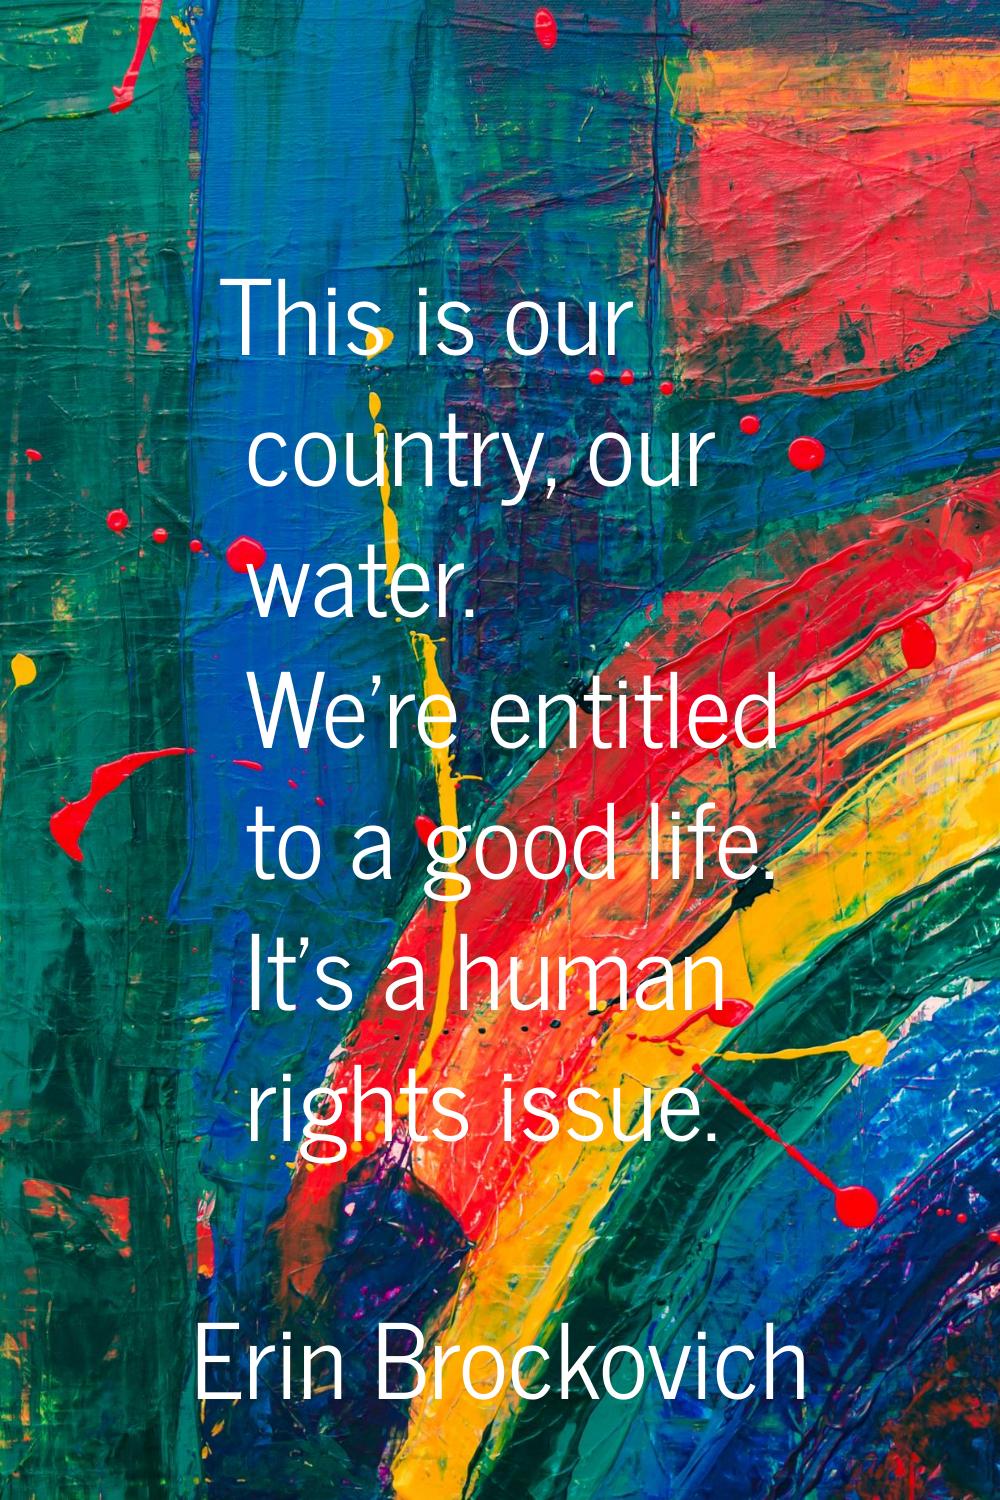 This is our country, our water. We're entitled to a good life. It's a human rights issue.